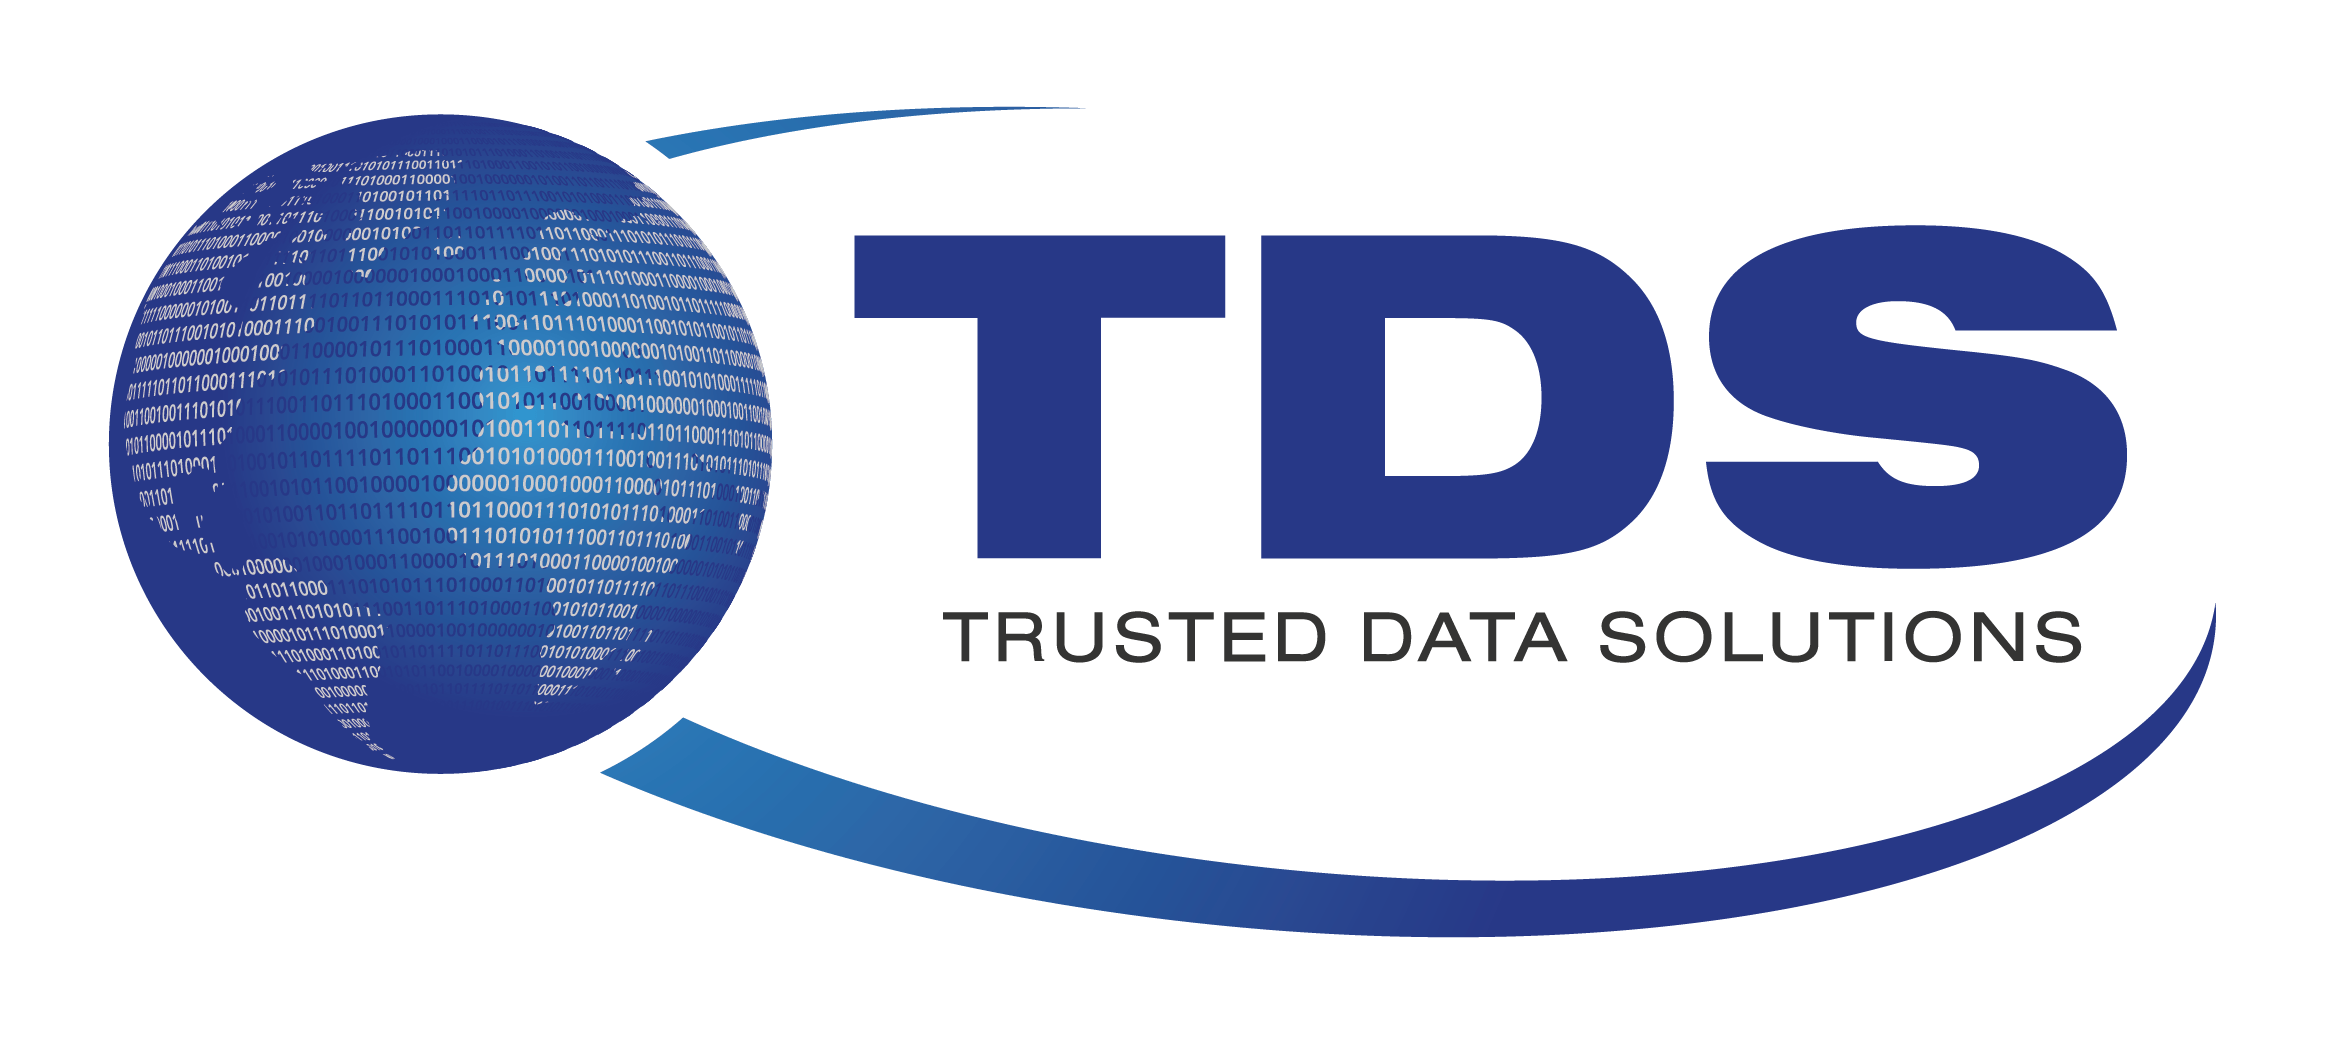 Tds Inc Logo - About Us. Trusted Data Solutions